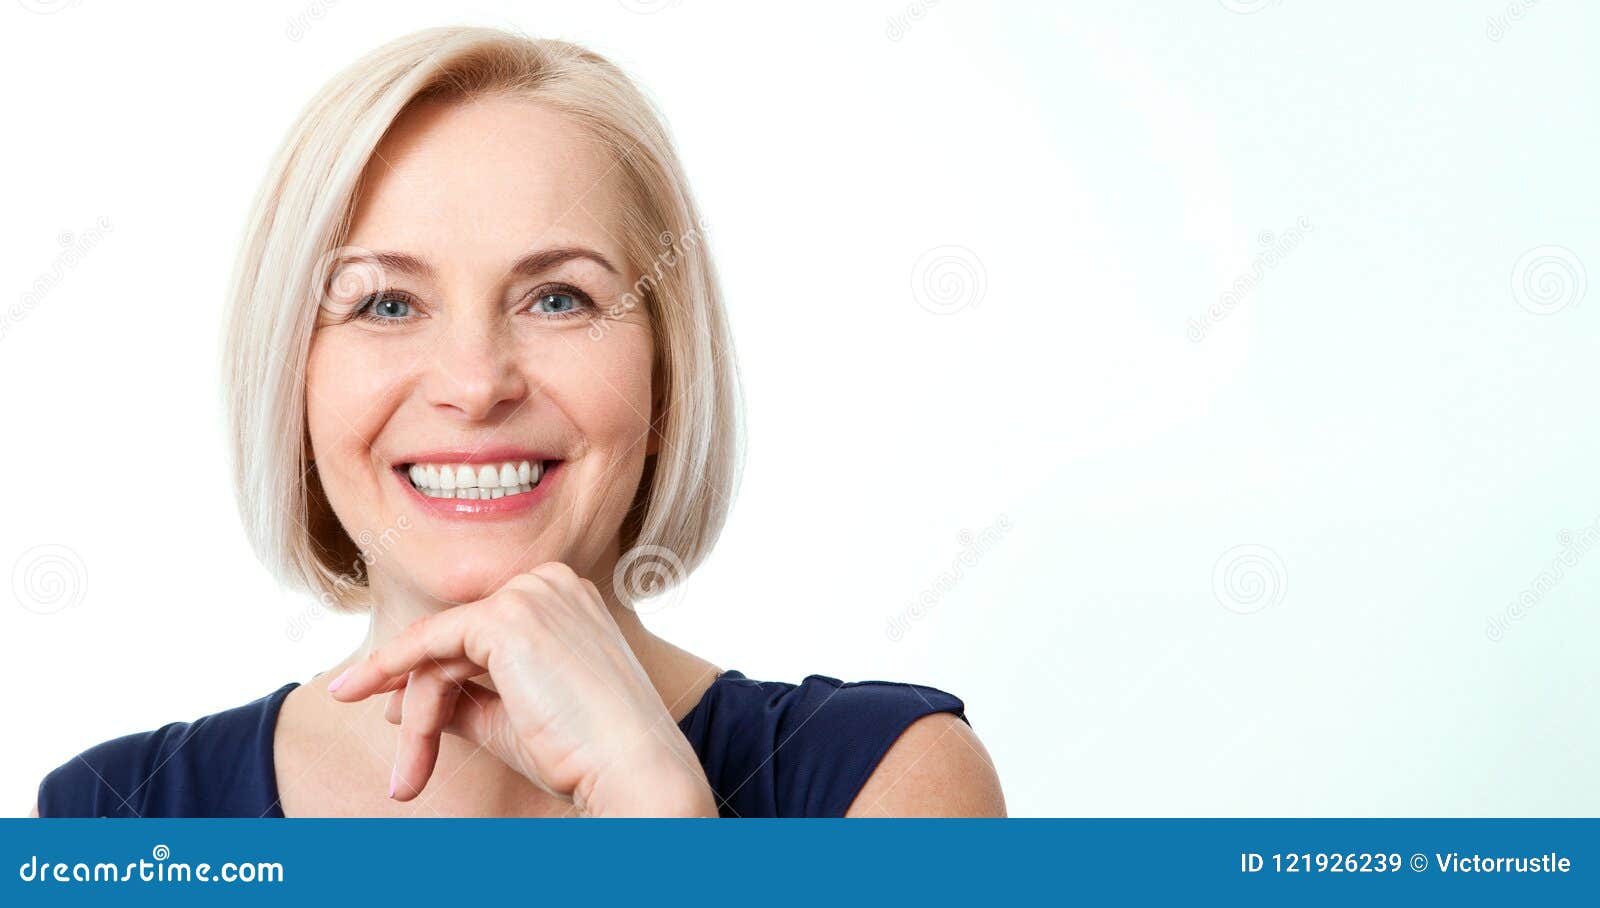 attractive middle aged woman with beautiful smile on white background